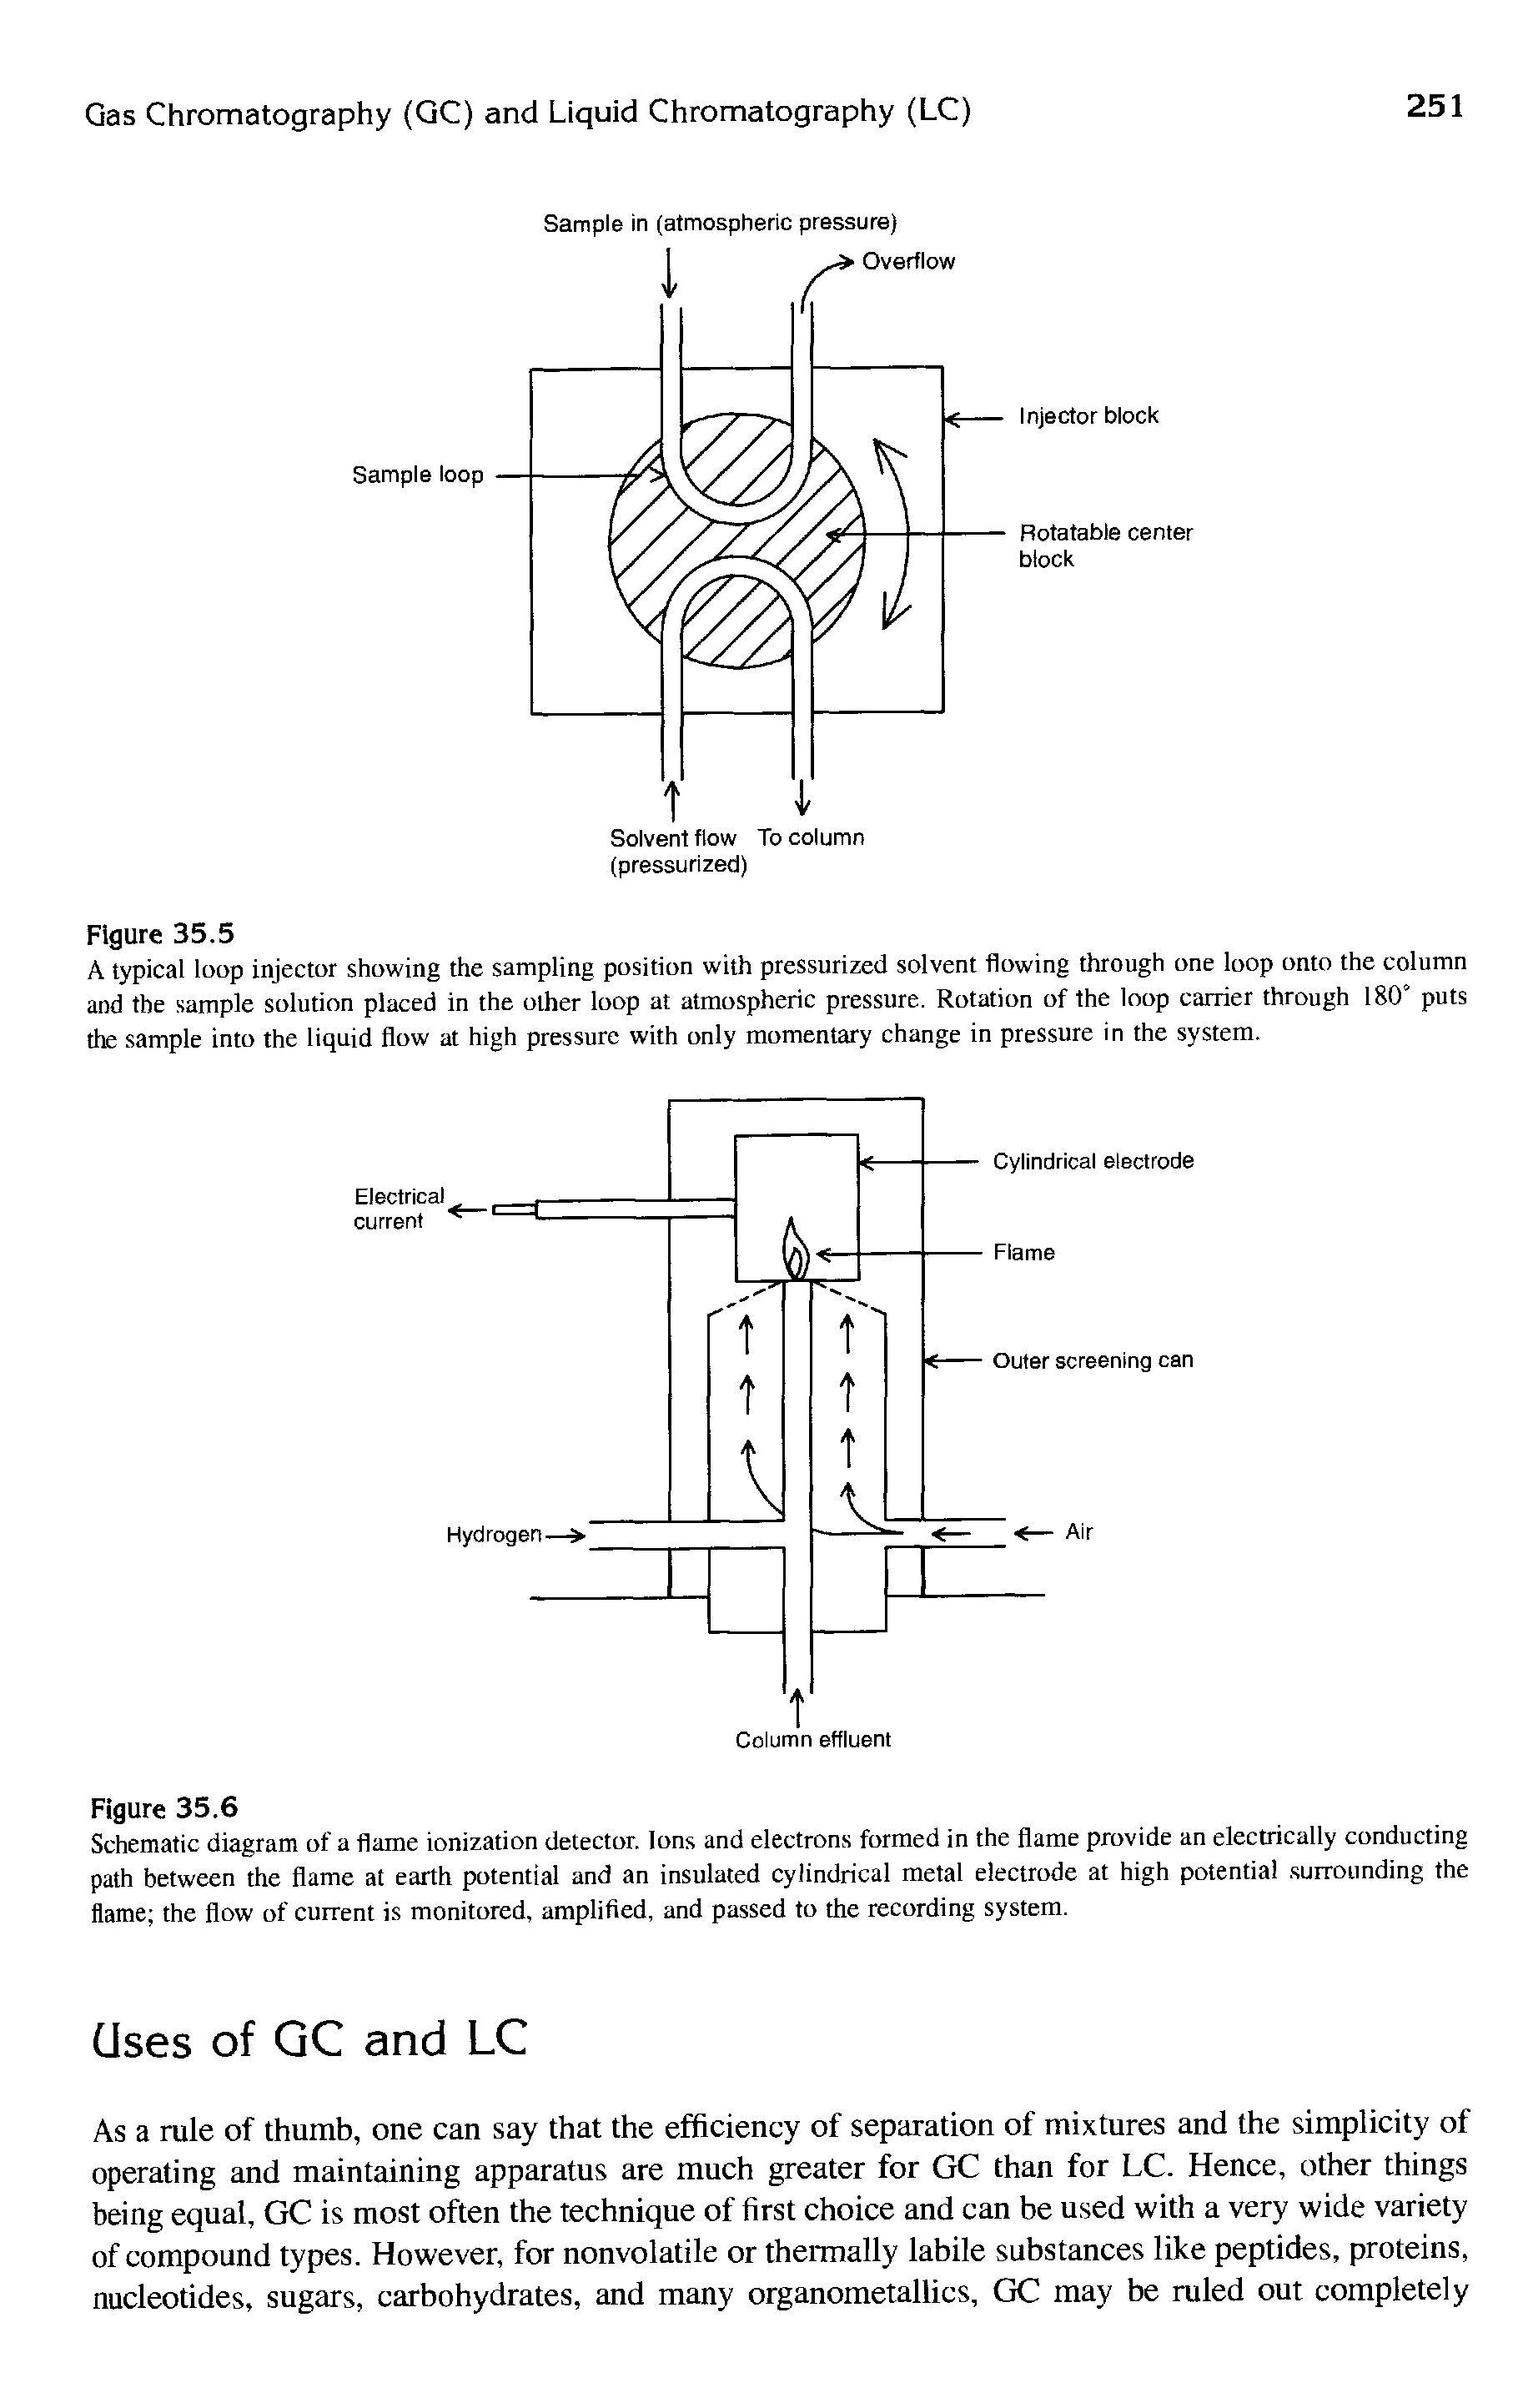 Schematic diagram of a flame ionization detector. Ions and electrons formed in the flame provide an electrically conducting path between the flame at earth potential and an insulated cylindrical metal electrode at high potential. surrounding the flame the flow of current is monitored, amplified, and passed to the recording system.